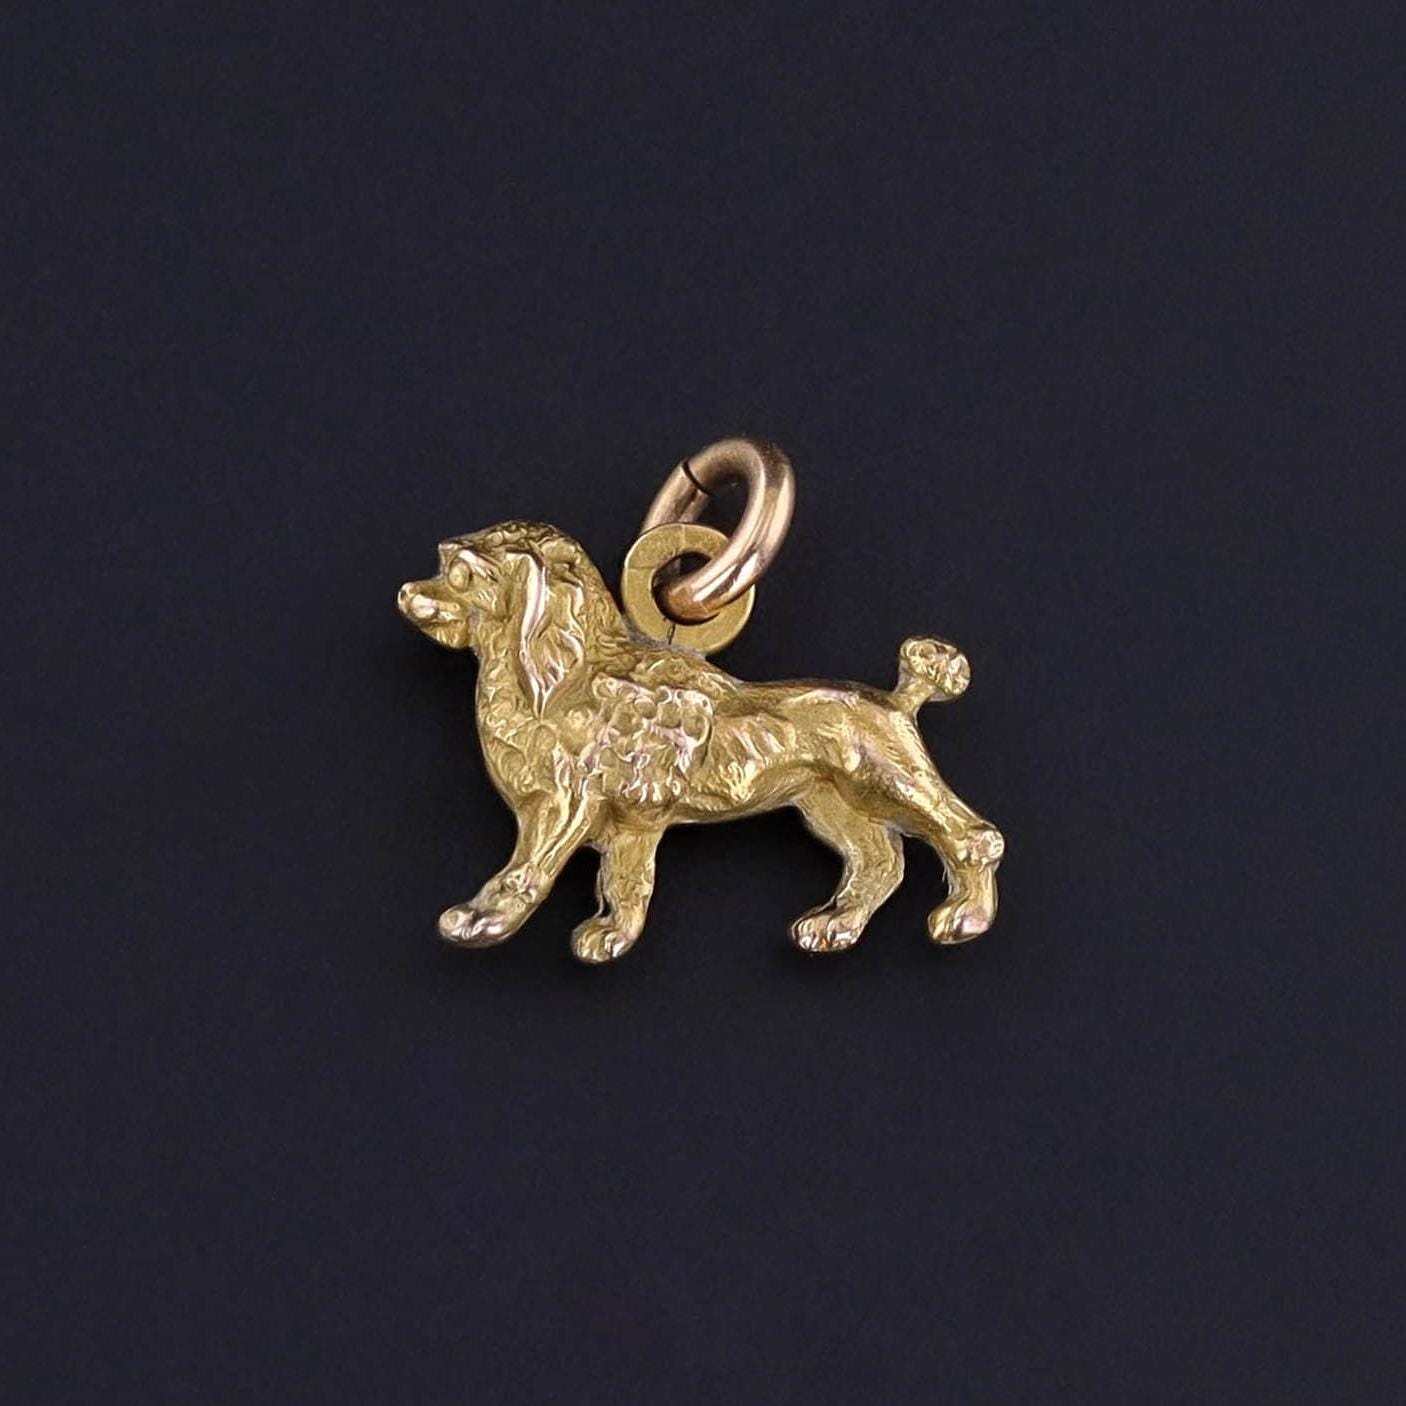 A 10k gold vintage poodle dog charm. This charm dates to the early 1900s. It is in very good condition. Perfect for any charm collector or vintage jewelry lover.